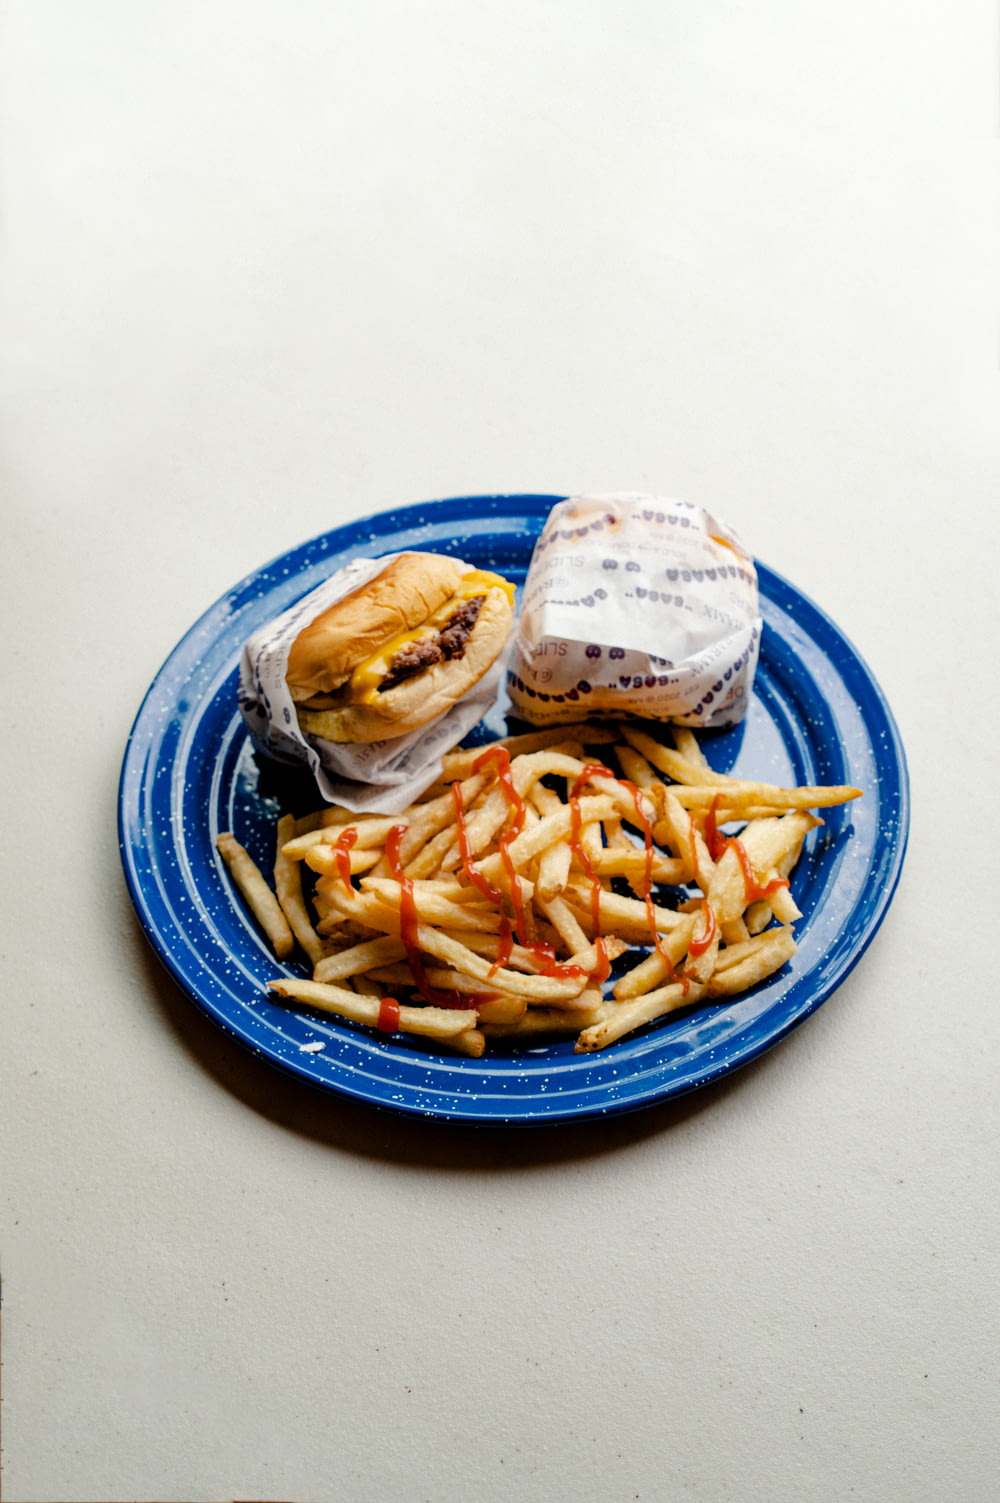 burger and fries on blue and white ceramic plate